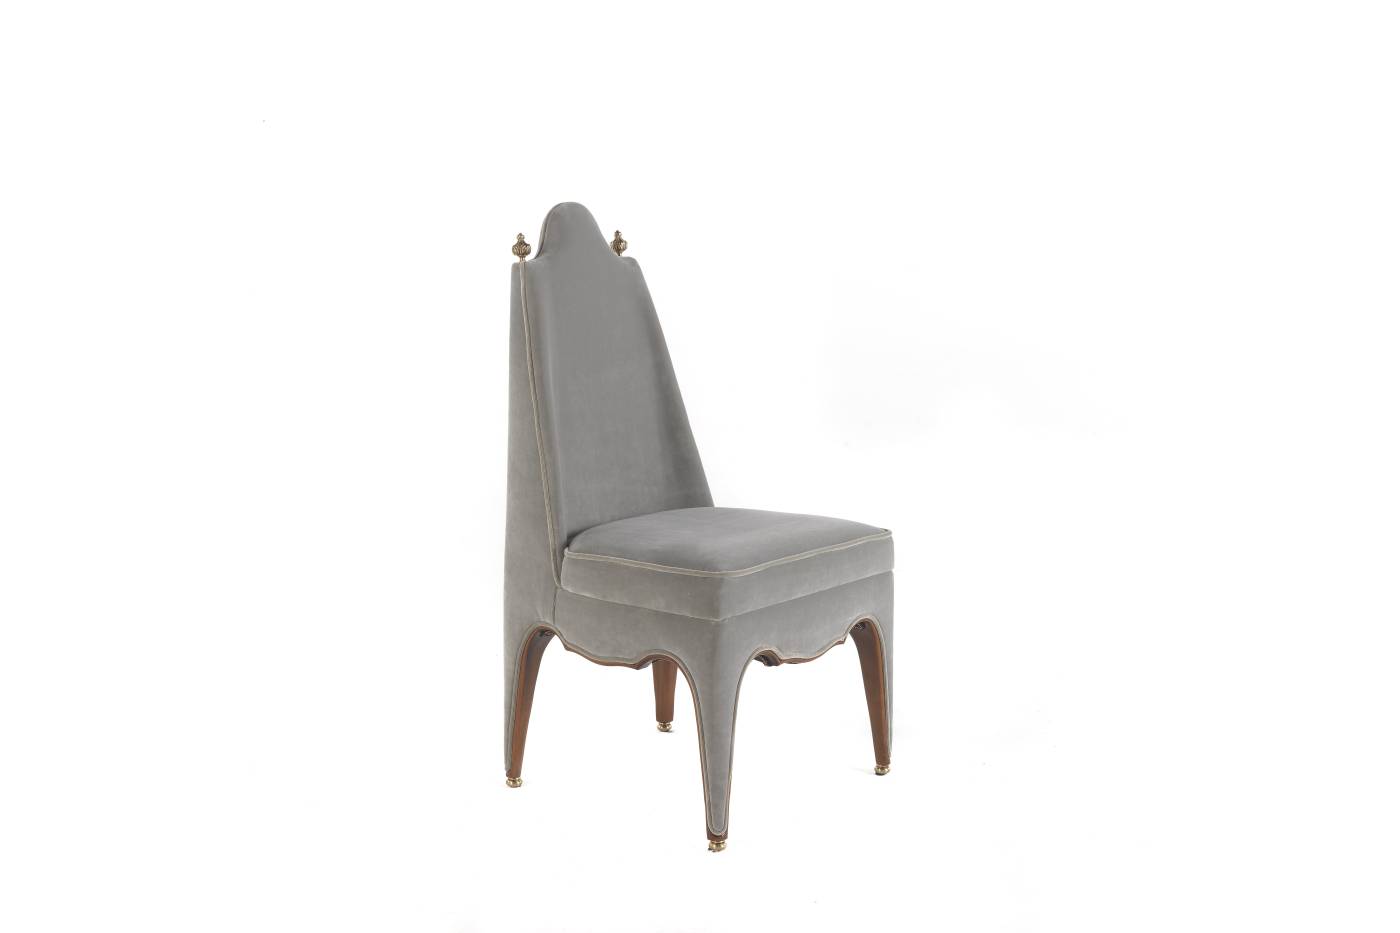 ETOILE chair - chair with armrests – Jumbo Collection Italian luxury classic chairs. tailor-made interior design projects to meet all your furnishing needs